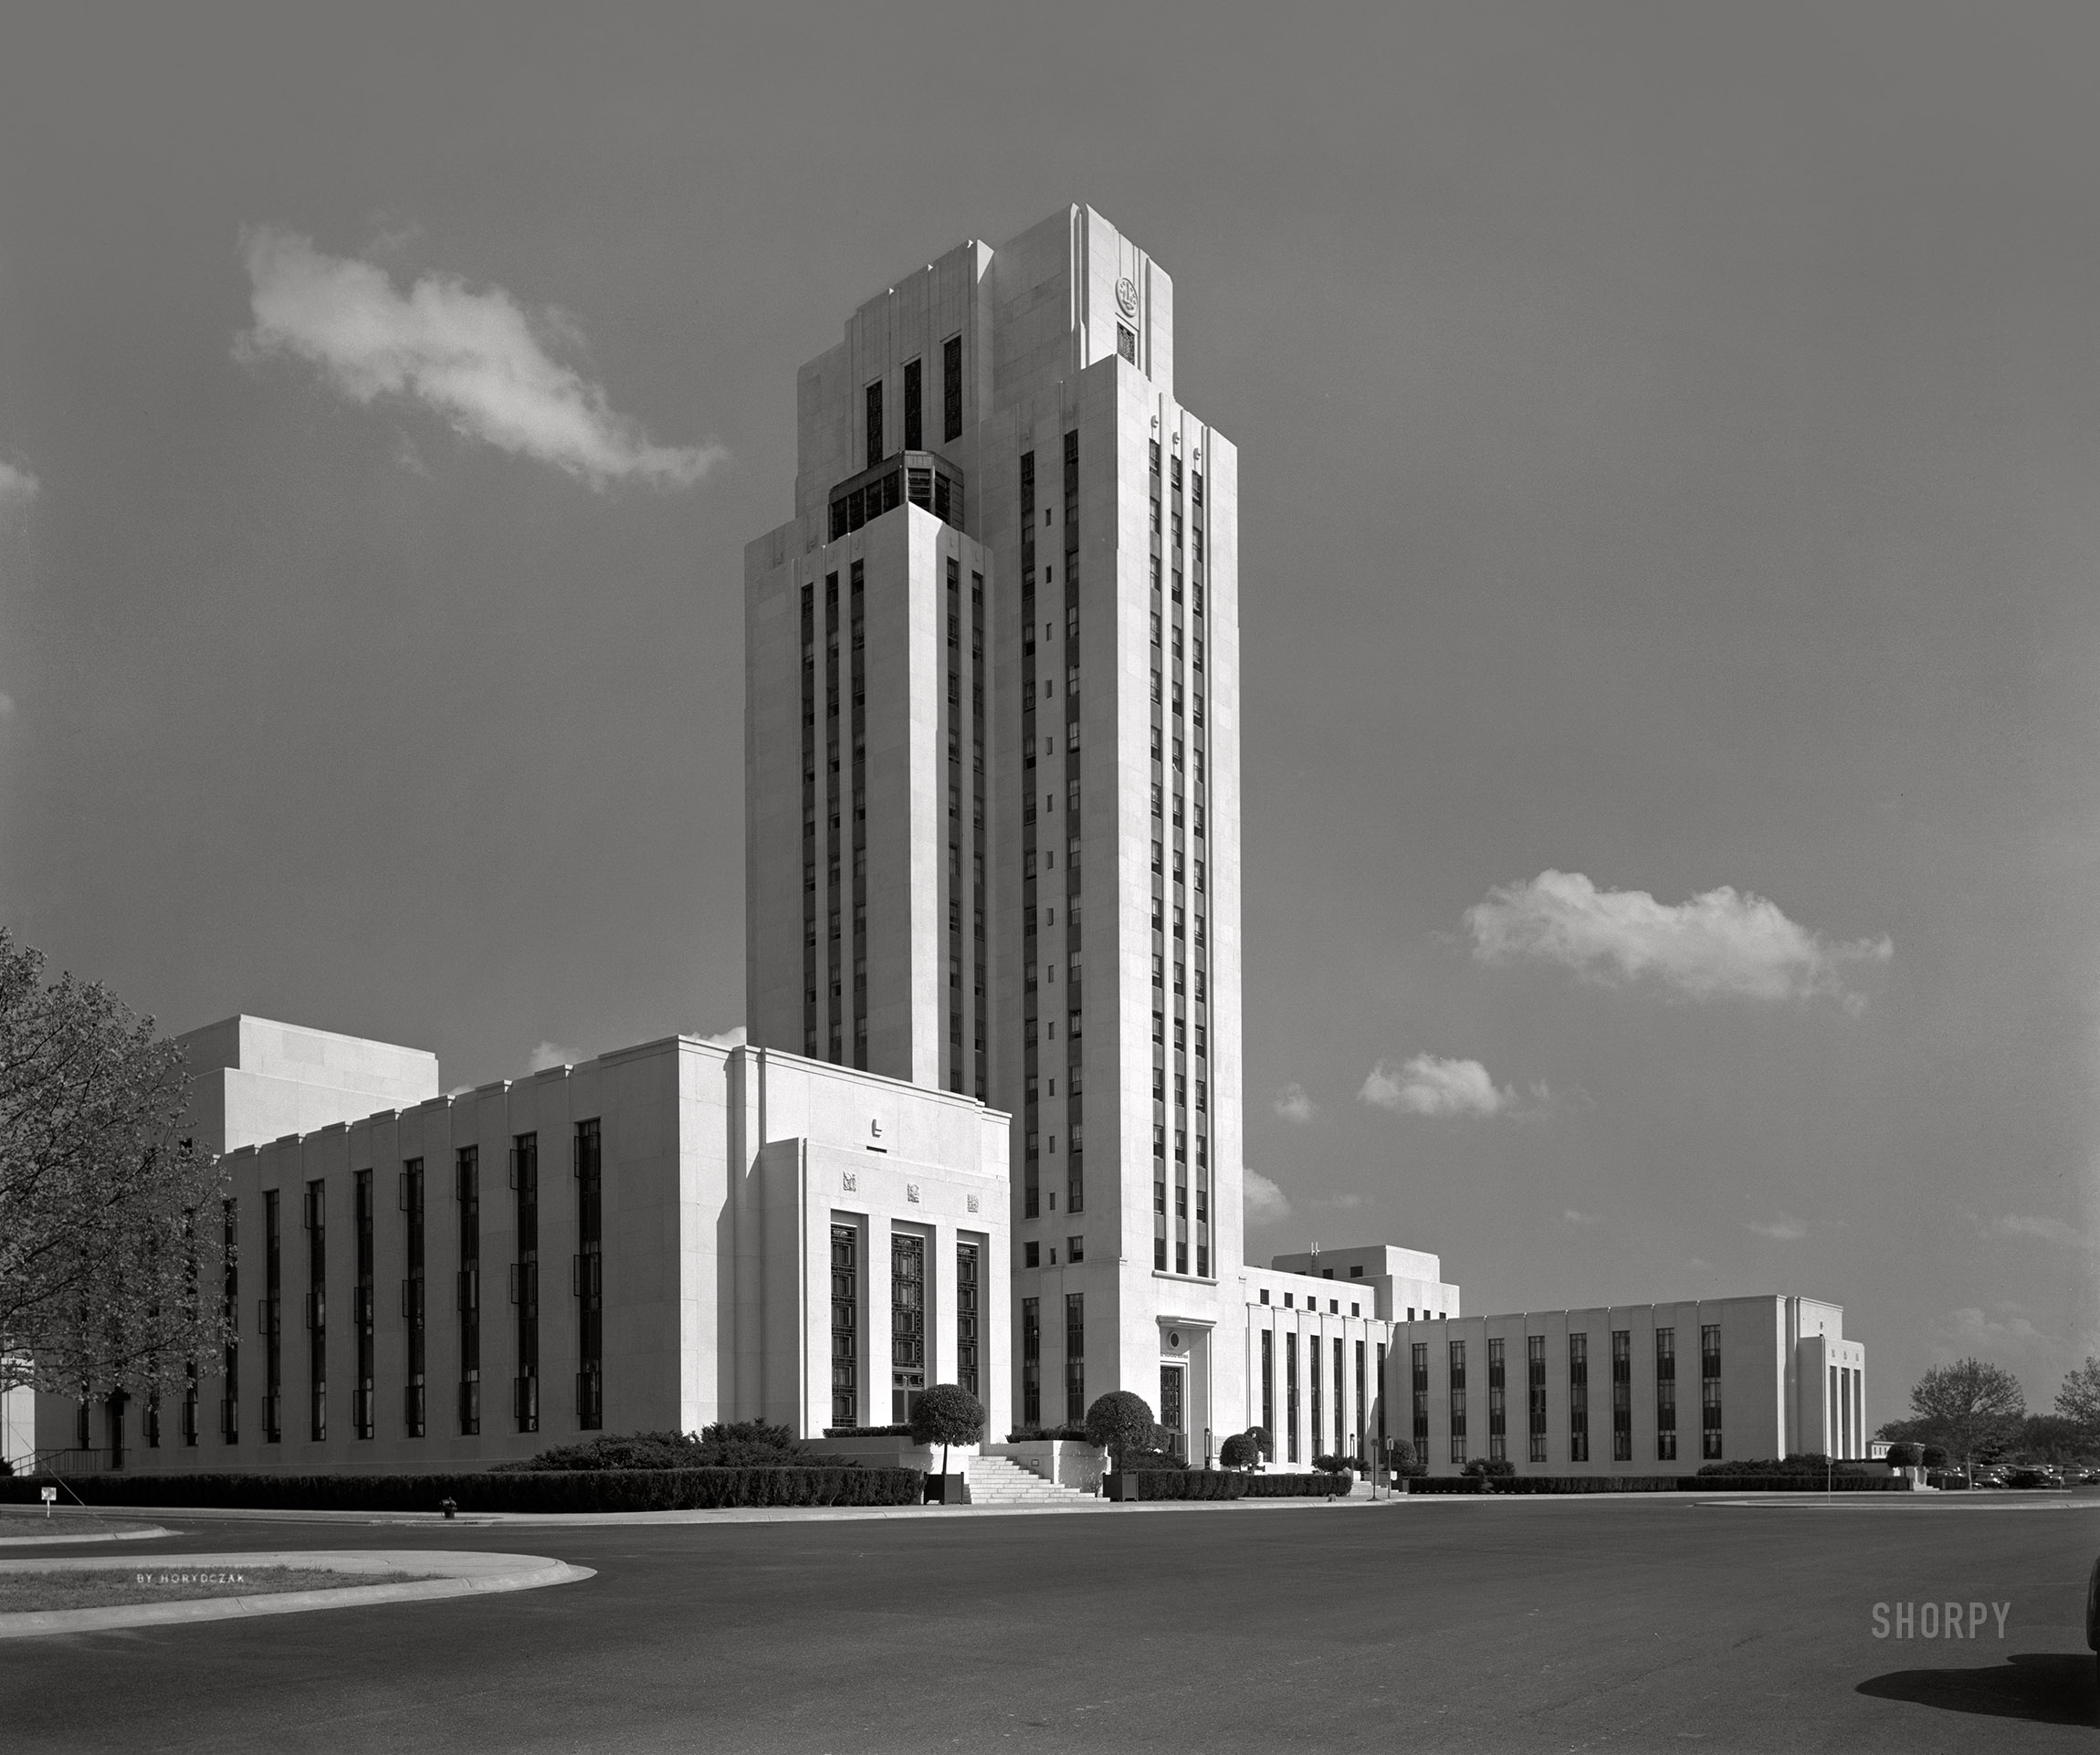 Bethesda, Maryland, circa 1940. "National Naval Medical Center, front from left." Part of the hospital complex known today as Walter Reed National Military Medical Center. 8x10 inch acetate negative by Theodor Horydczak. View full size.